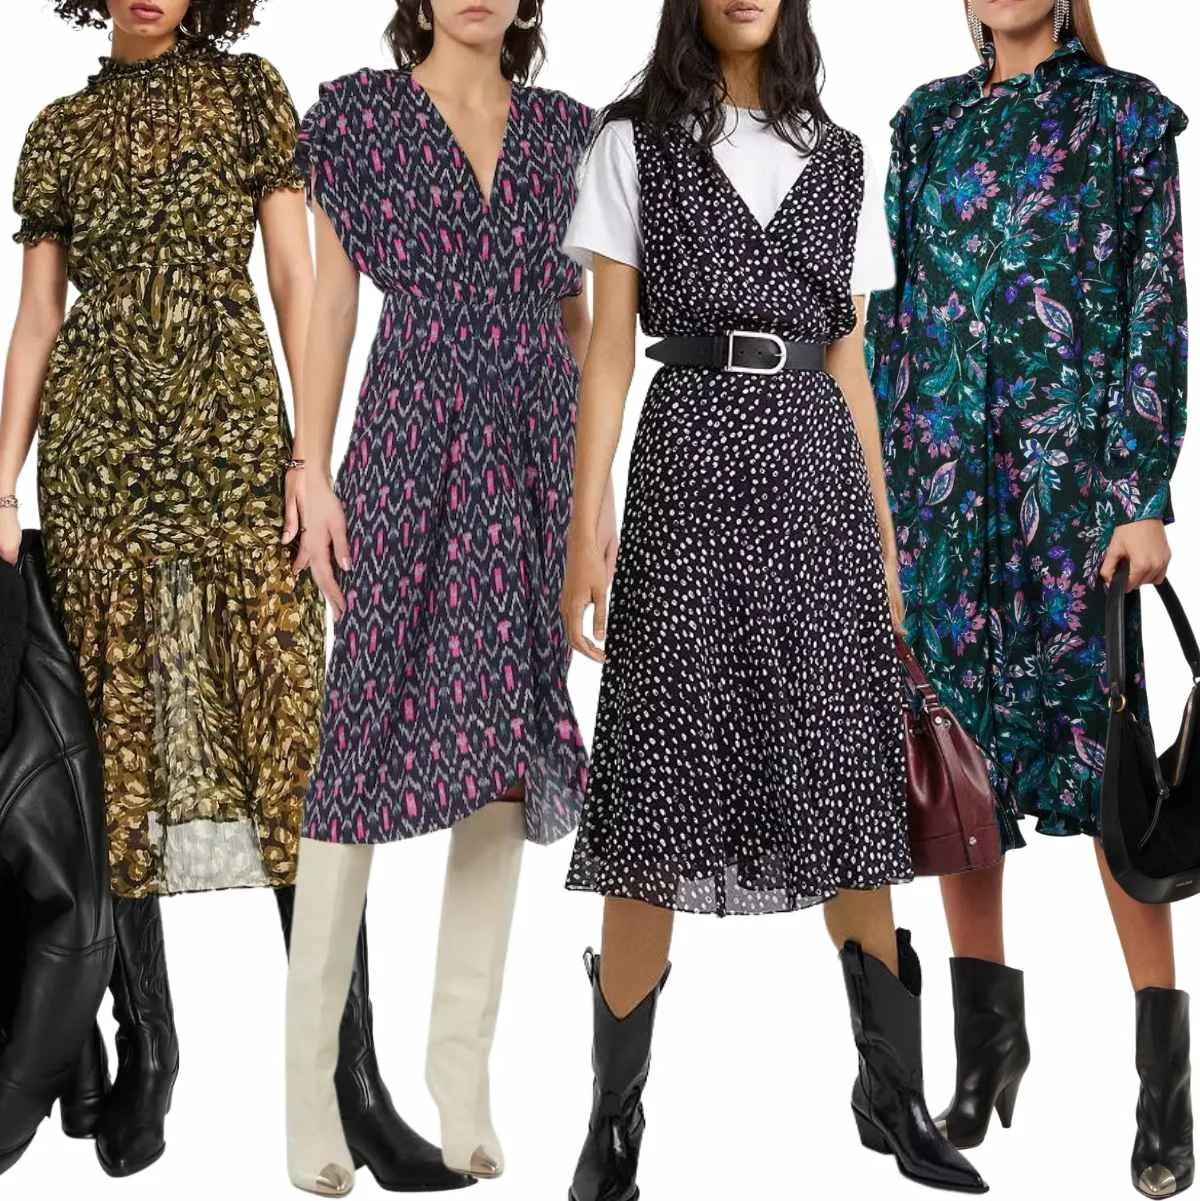 Collage of 5 women wearing different midi dresses with cowboy boots.